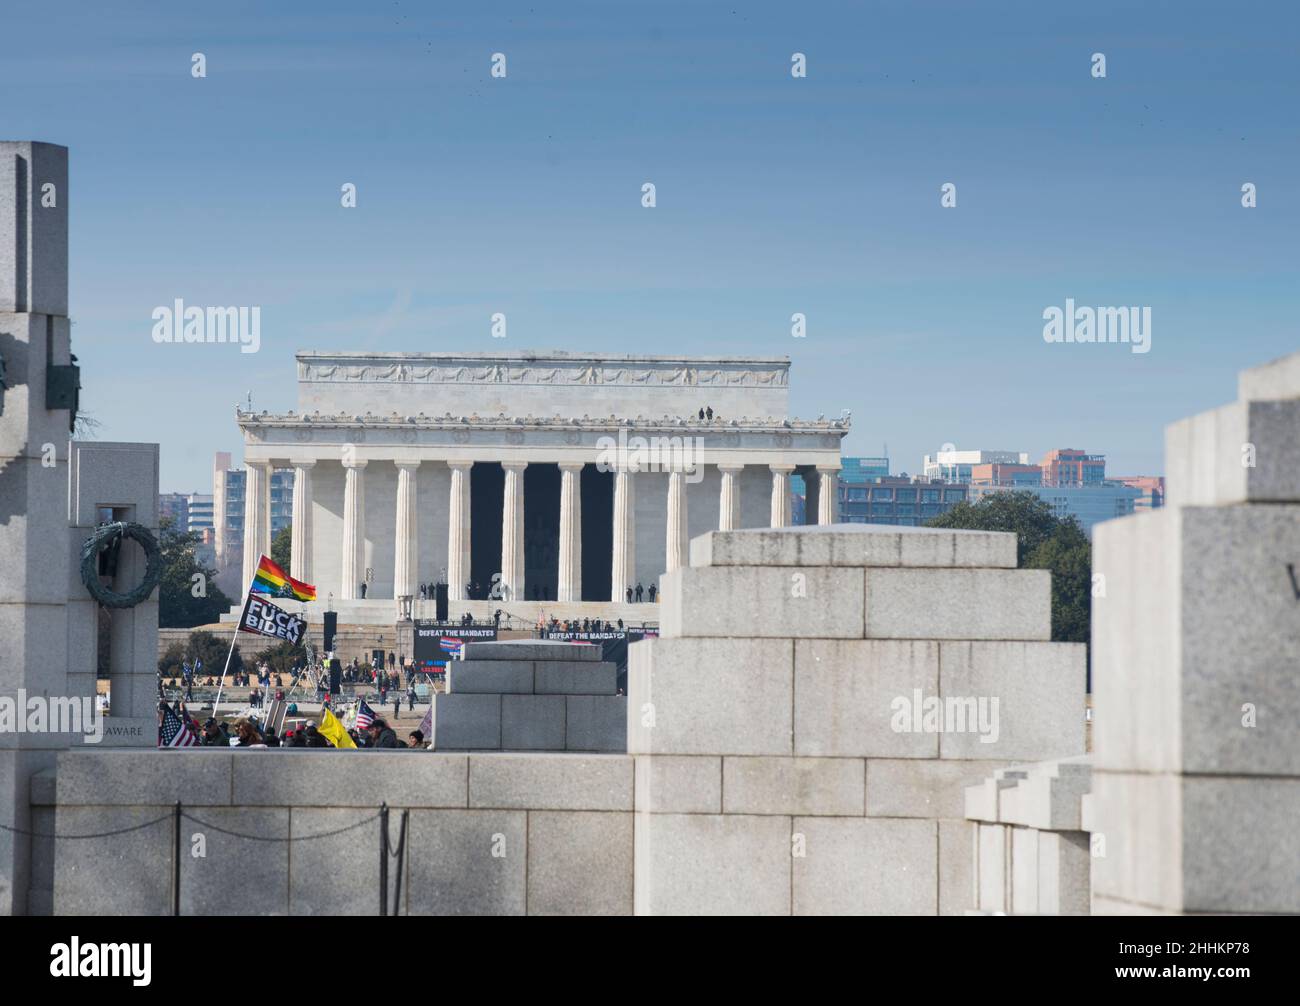 Demonstrators participate in the Defeat the Mandates march towards the Lincoln Memorial reflective pool in Washington, DC, on January 23, 2022. Stock Photo